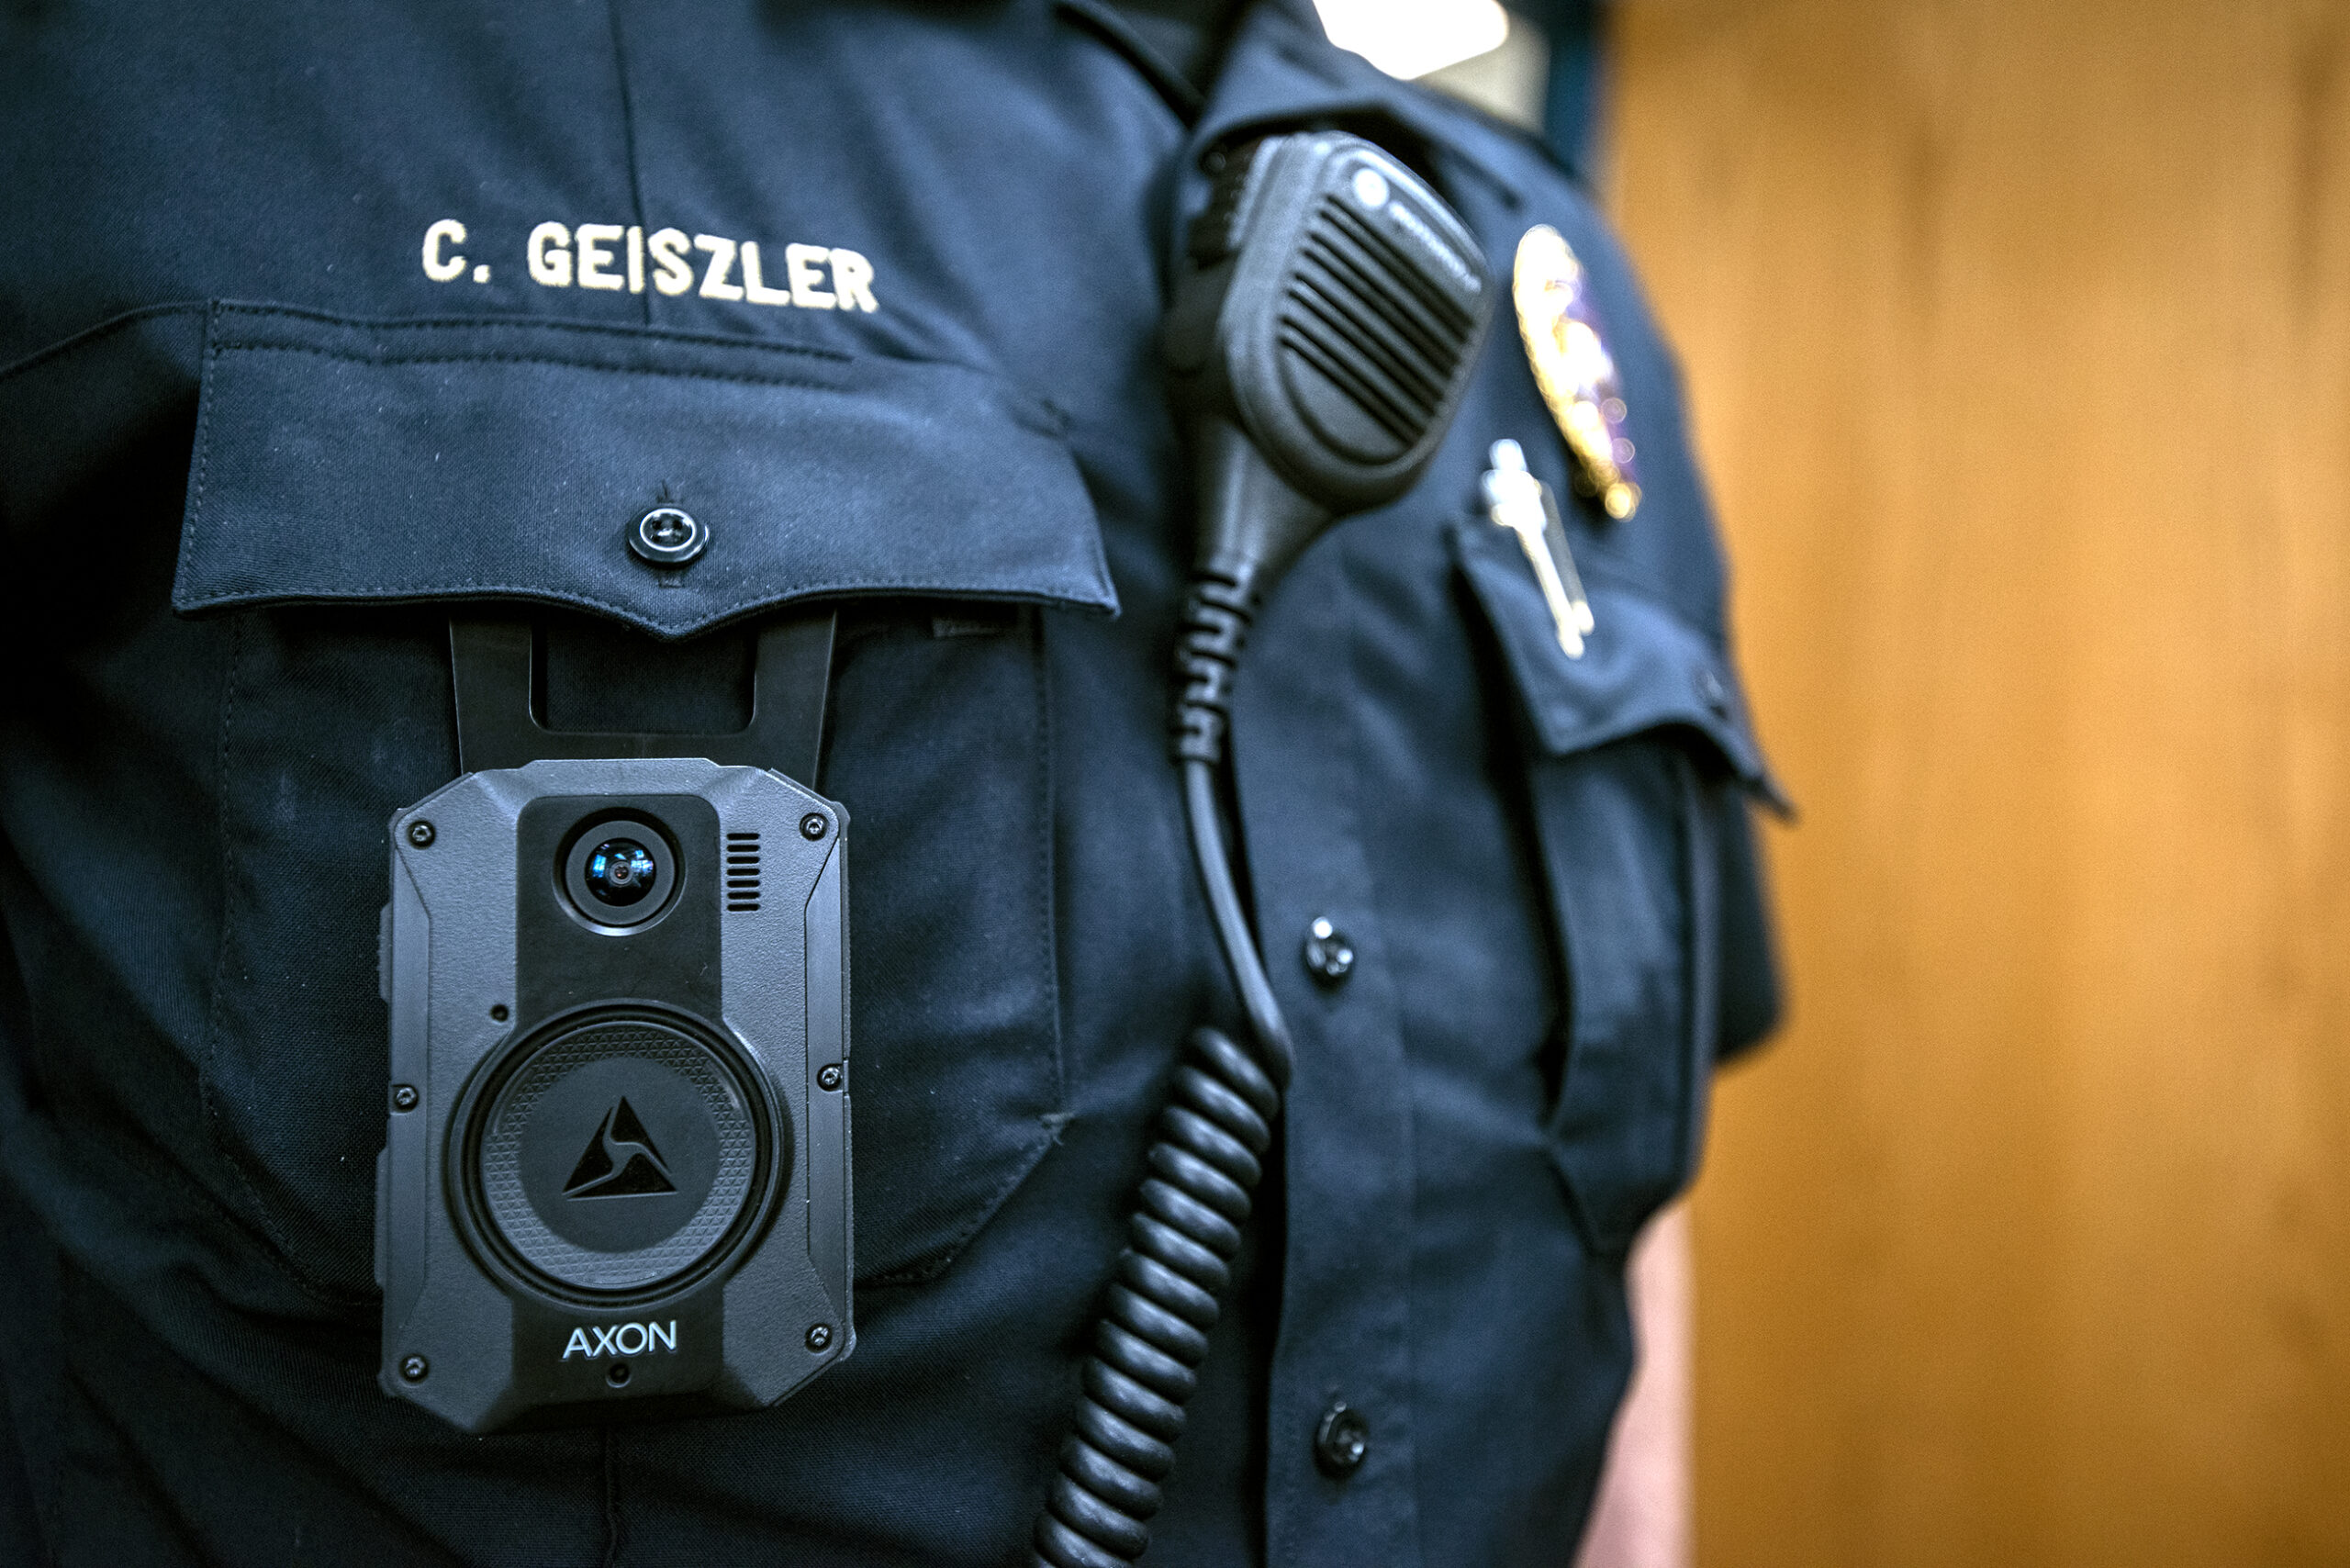 Madison police will try out body cameras, but some still doubt their efficacy